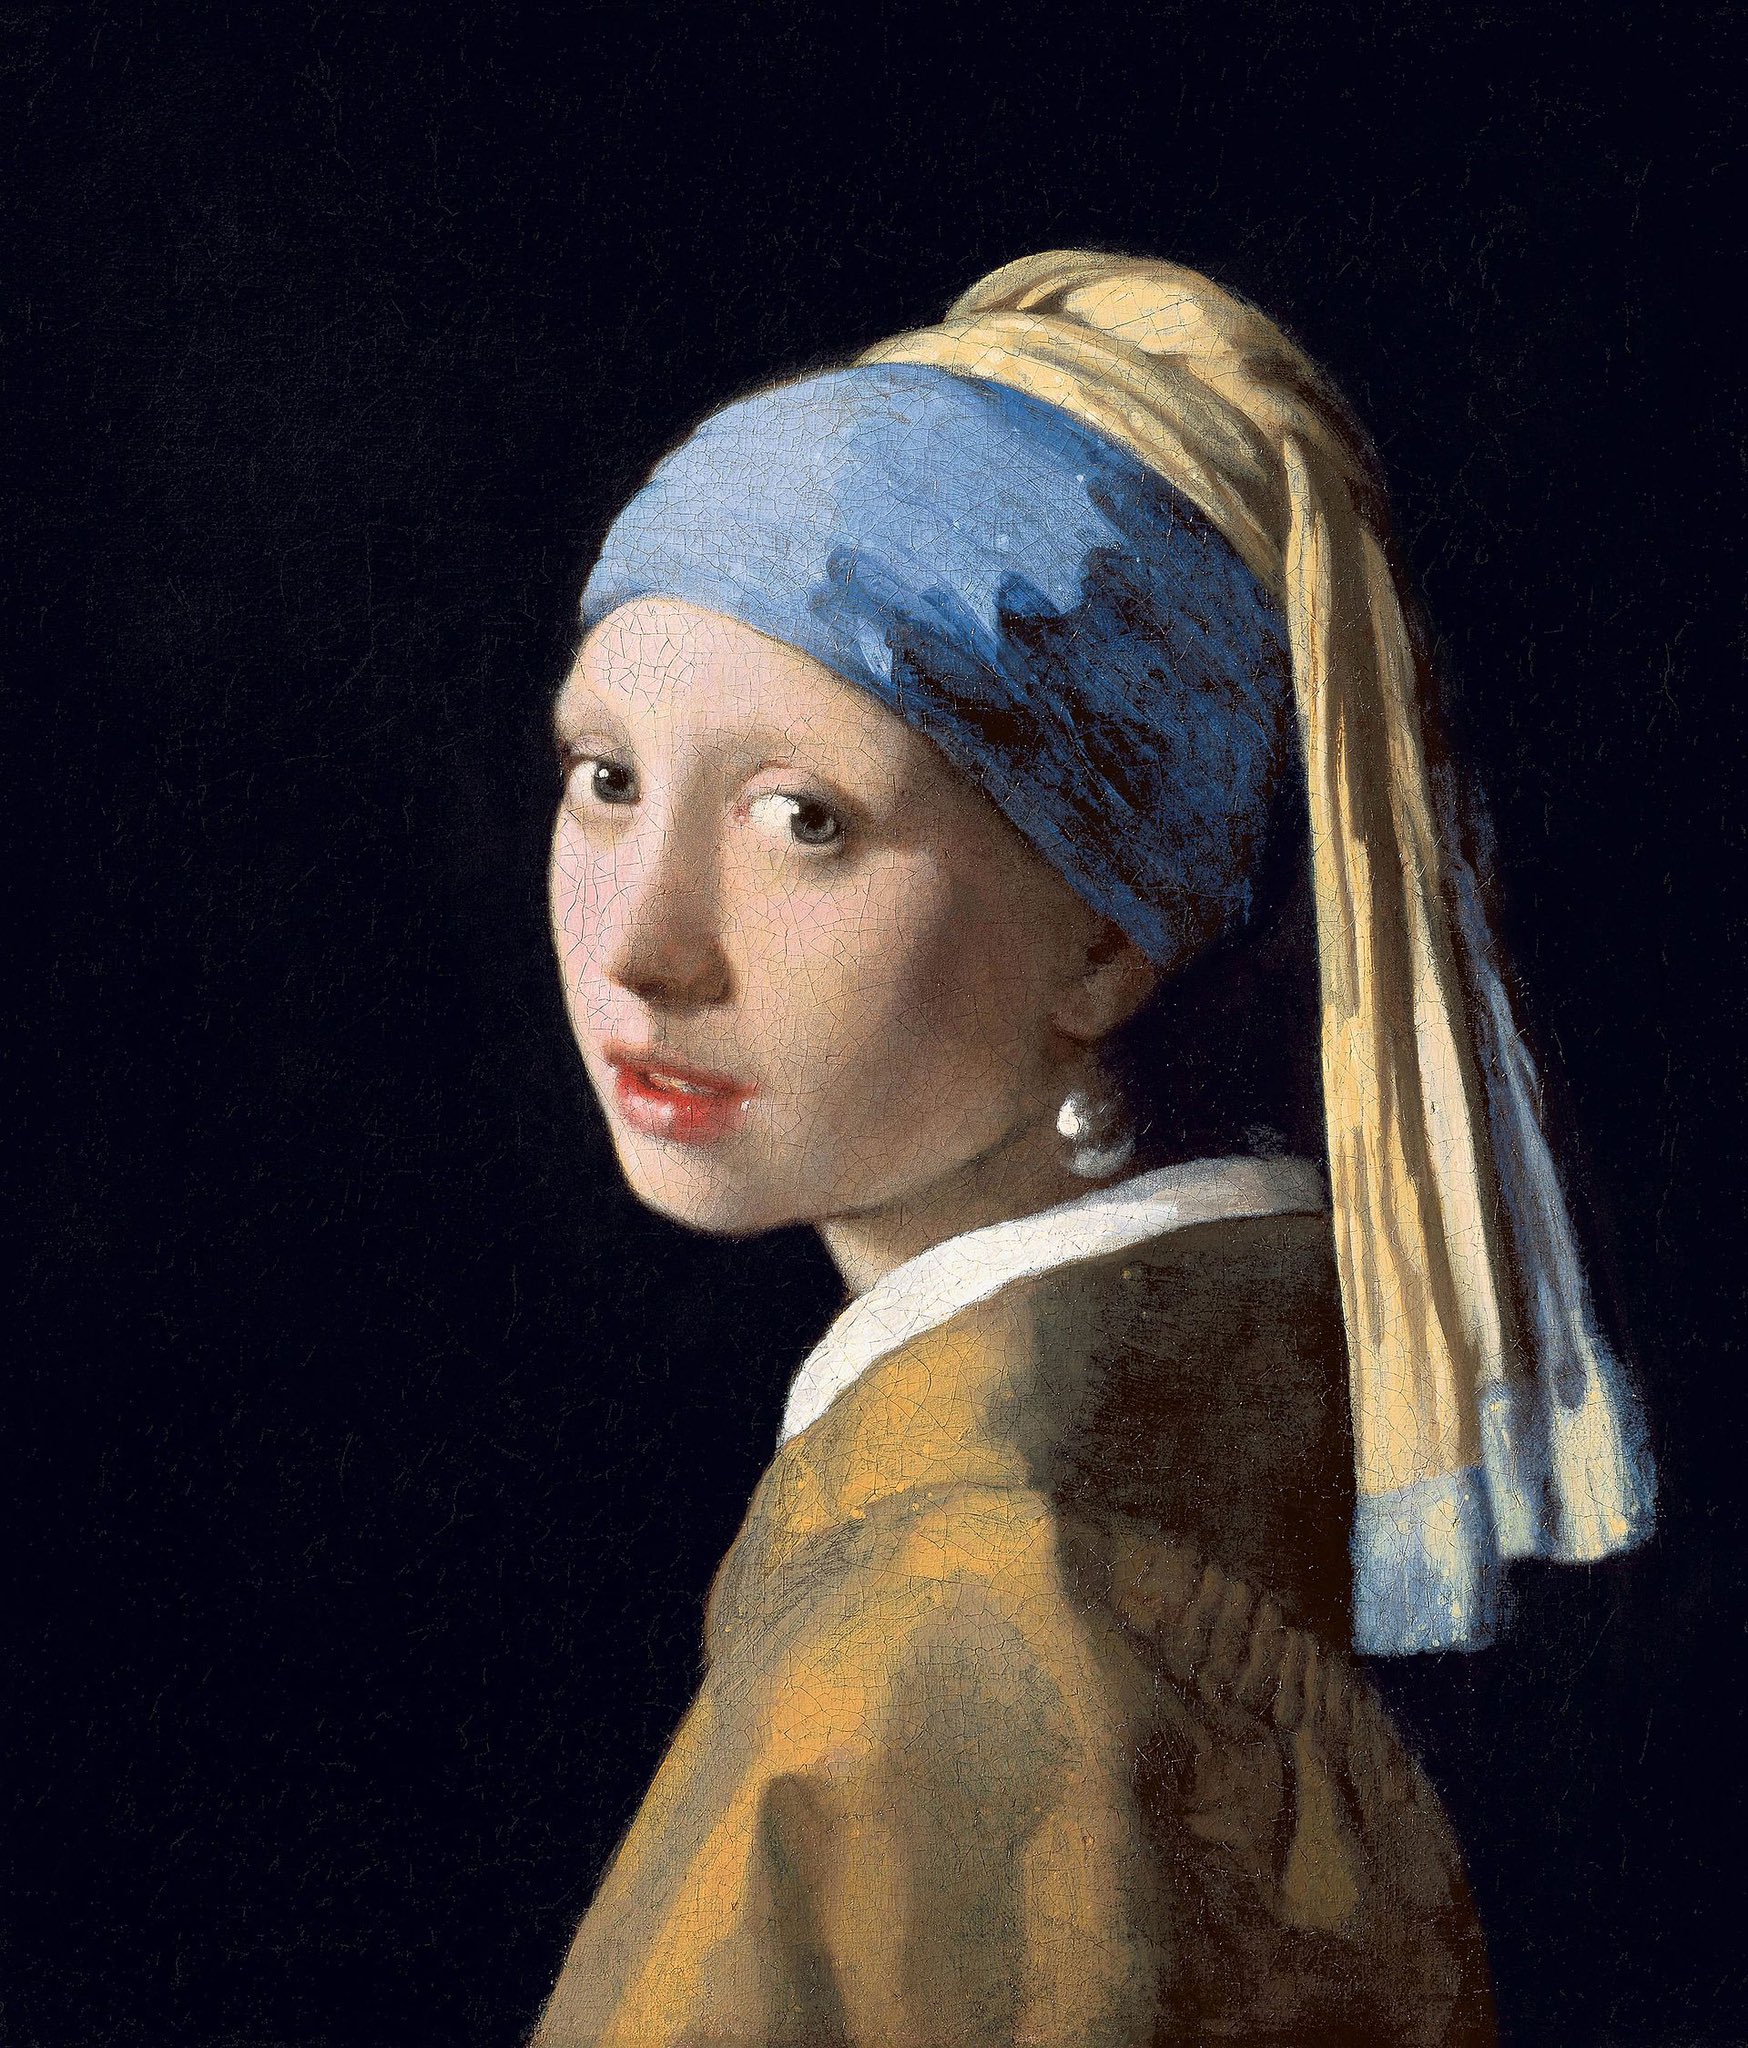 The original Girl with a Pearl Earring by Johannes Vermeer